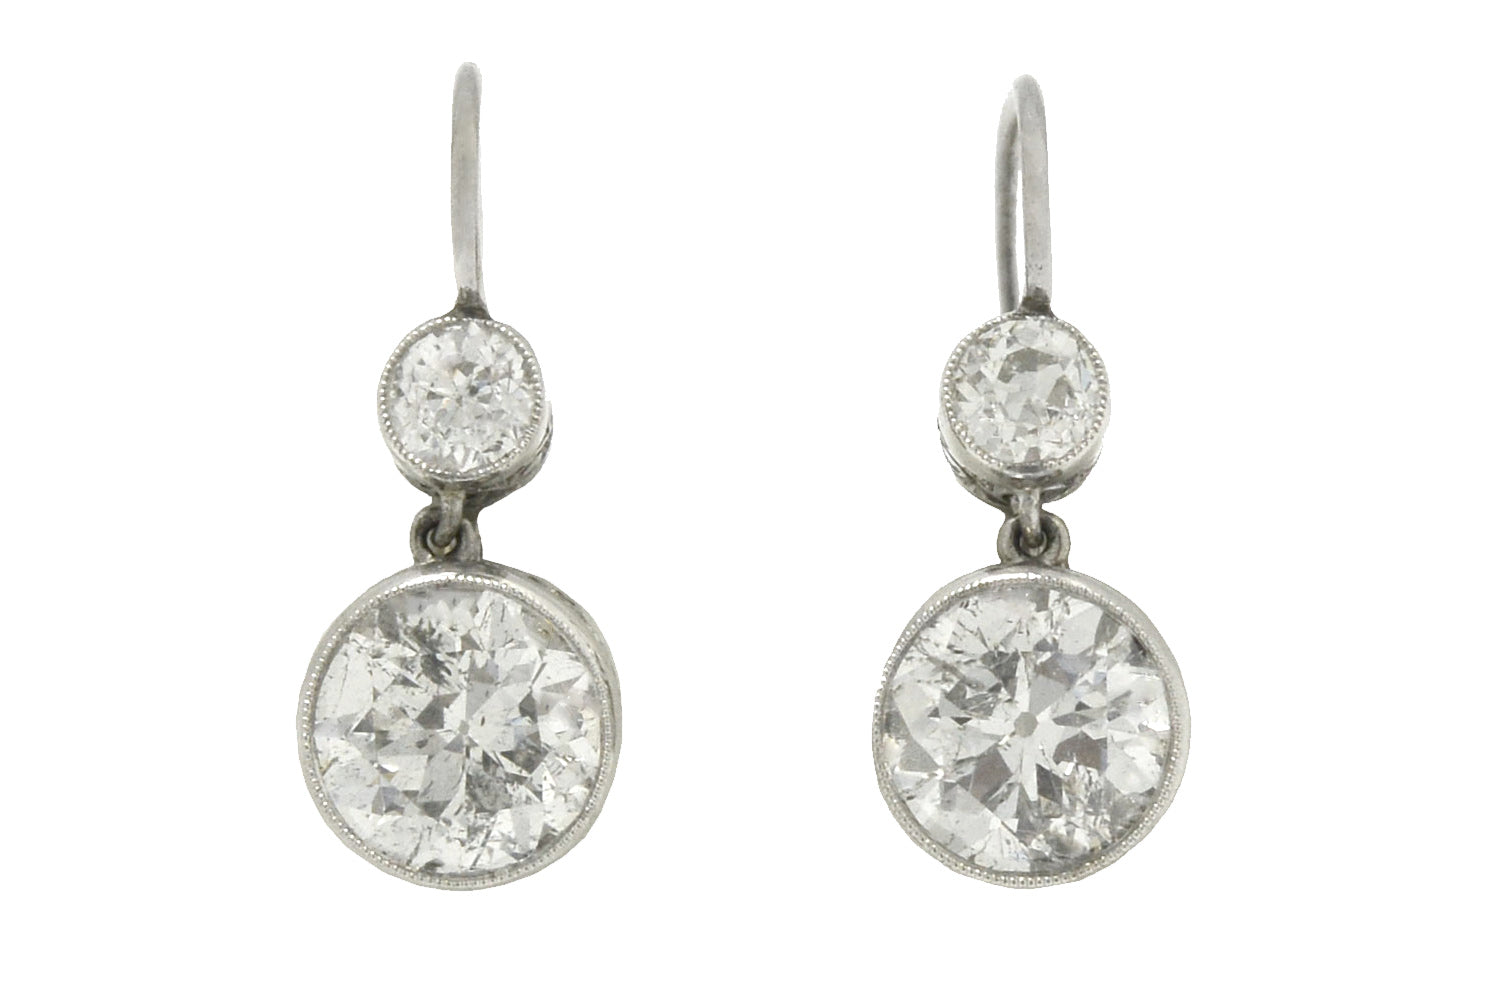 A glimmering pair of Art Deco style diamond drop earrings boasting 4.30 carats of dazzling beauty.